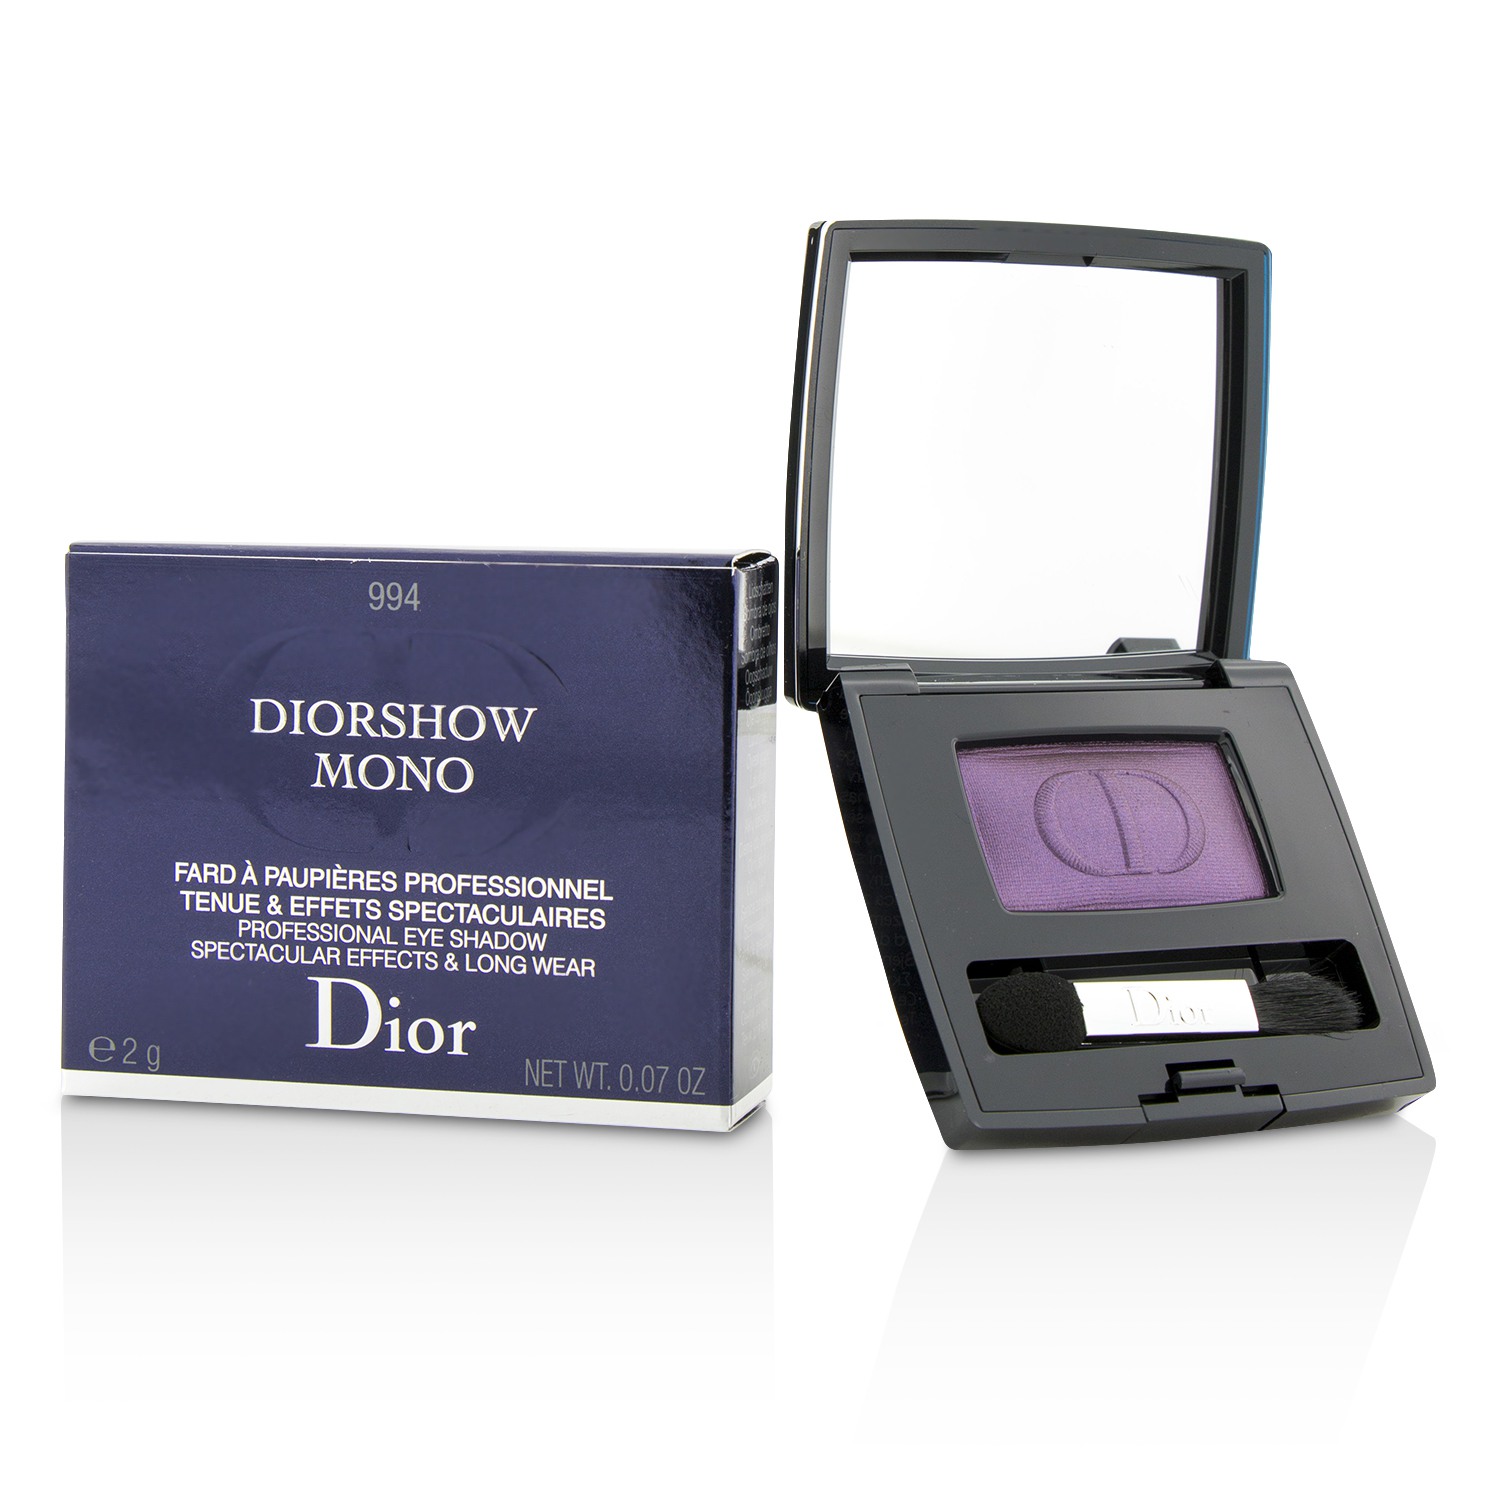 Diorshow Mono Professional Spectacular Effects & Long Wear Eyeshadow - # 994 Power Christian Dior Image